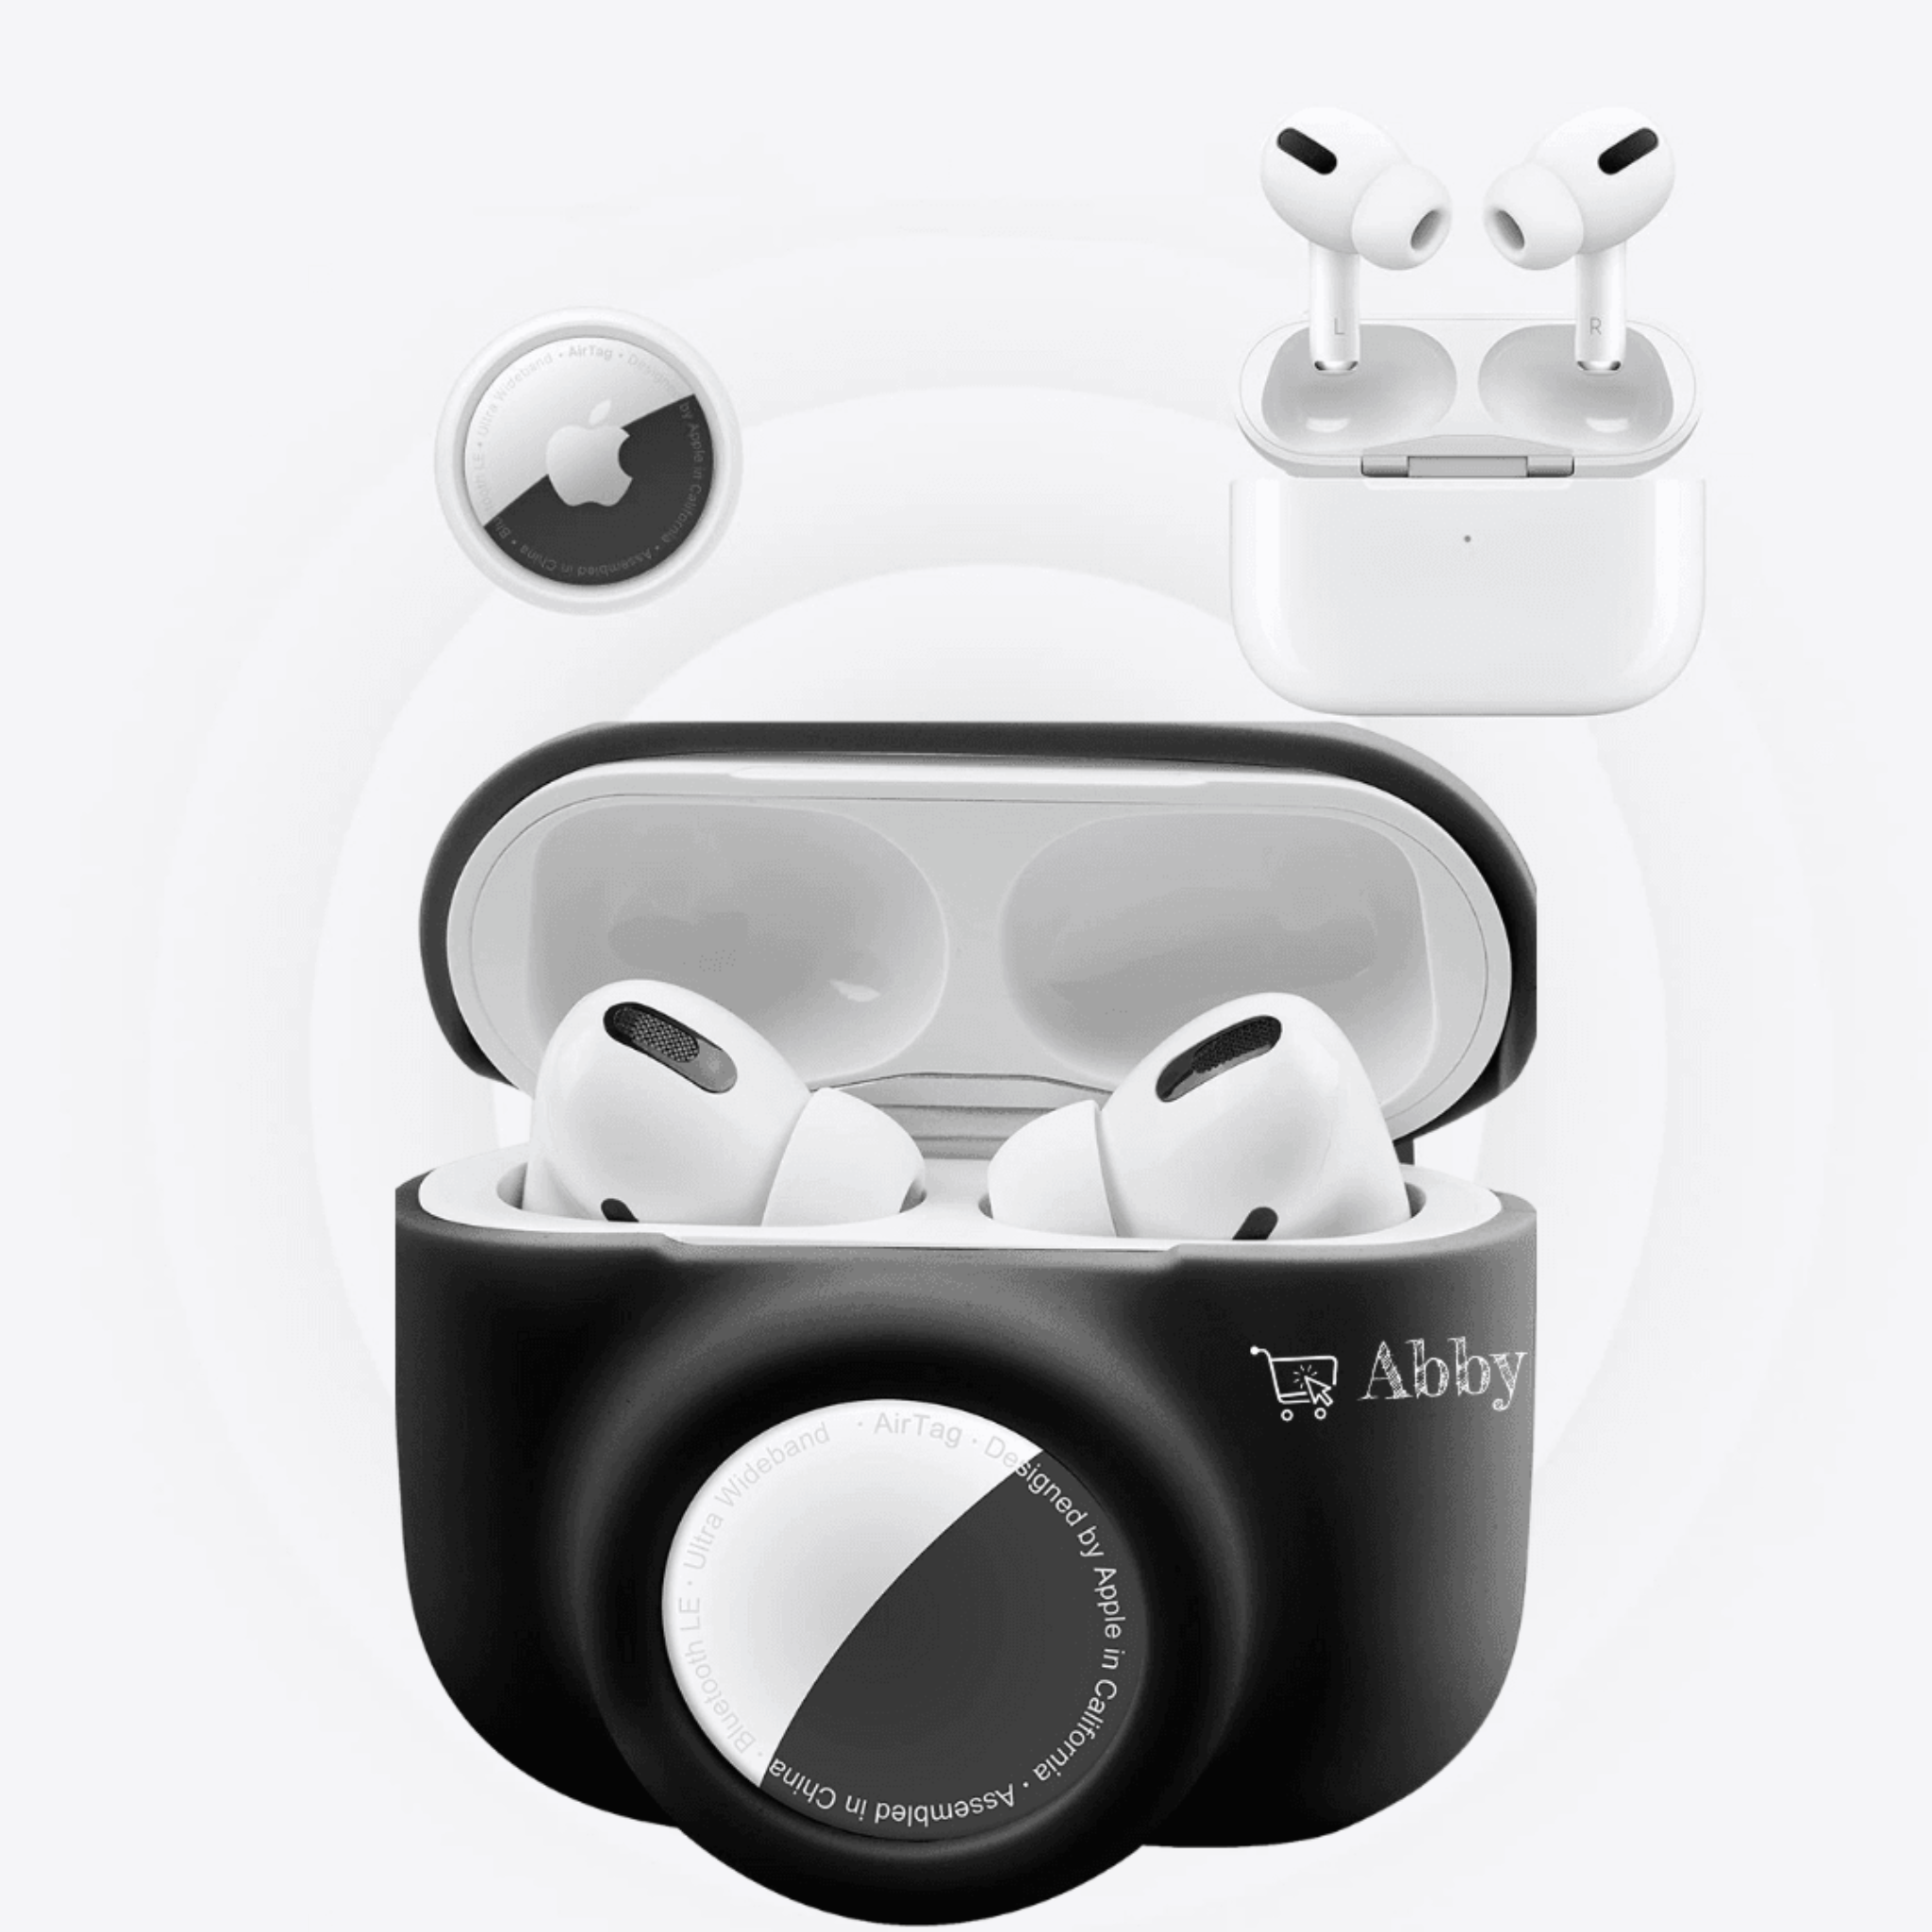 Have refined the design of Airpods + AirTag! Catalyst (shame it isn't  white) and Belkin : r/AirTags